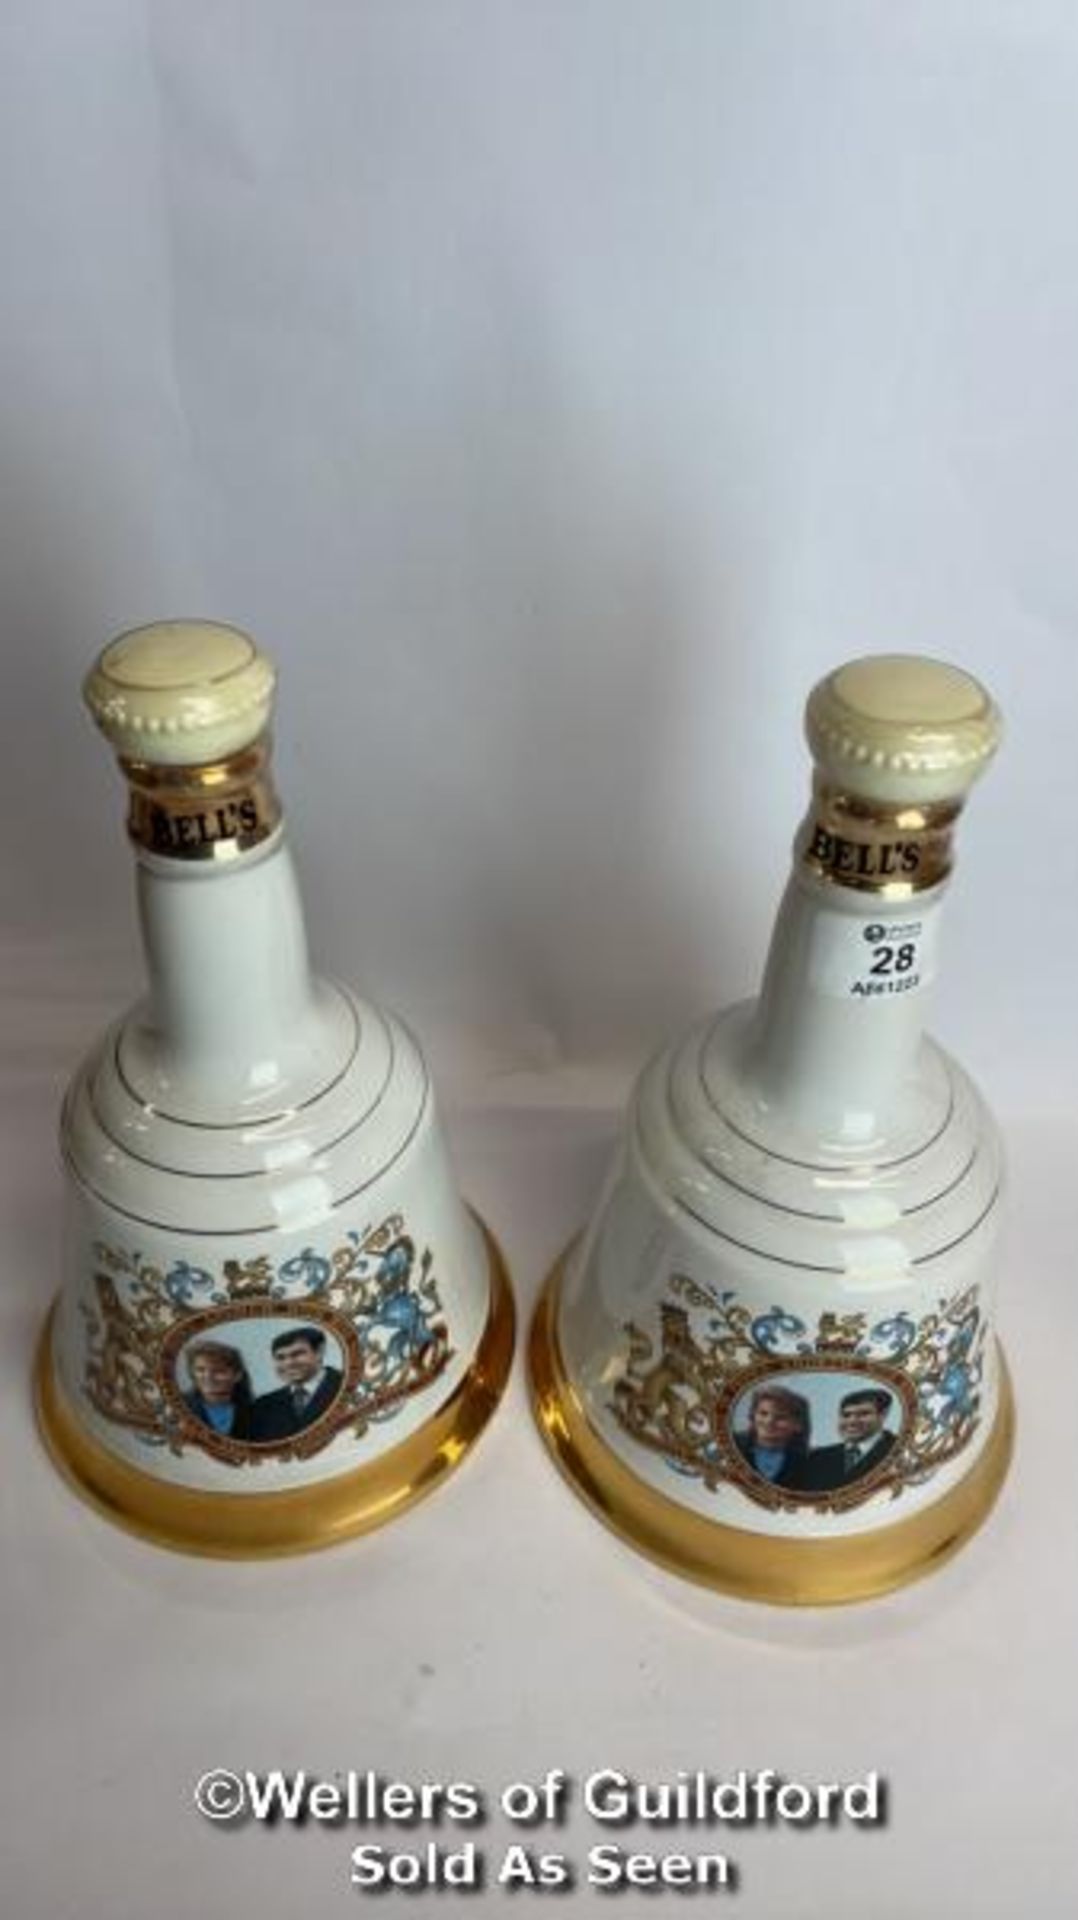 Two Bell's Scotch Whisky Decanters Commemerating The Marriage of Prince Andrew and Sarah Ferguson 23 - Image 6 of 10